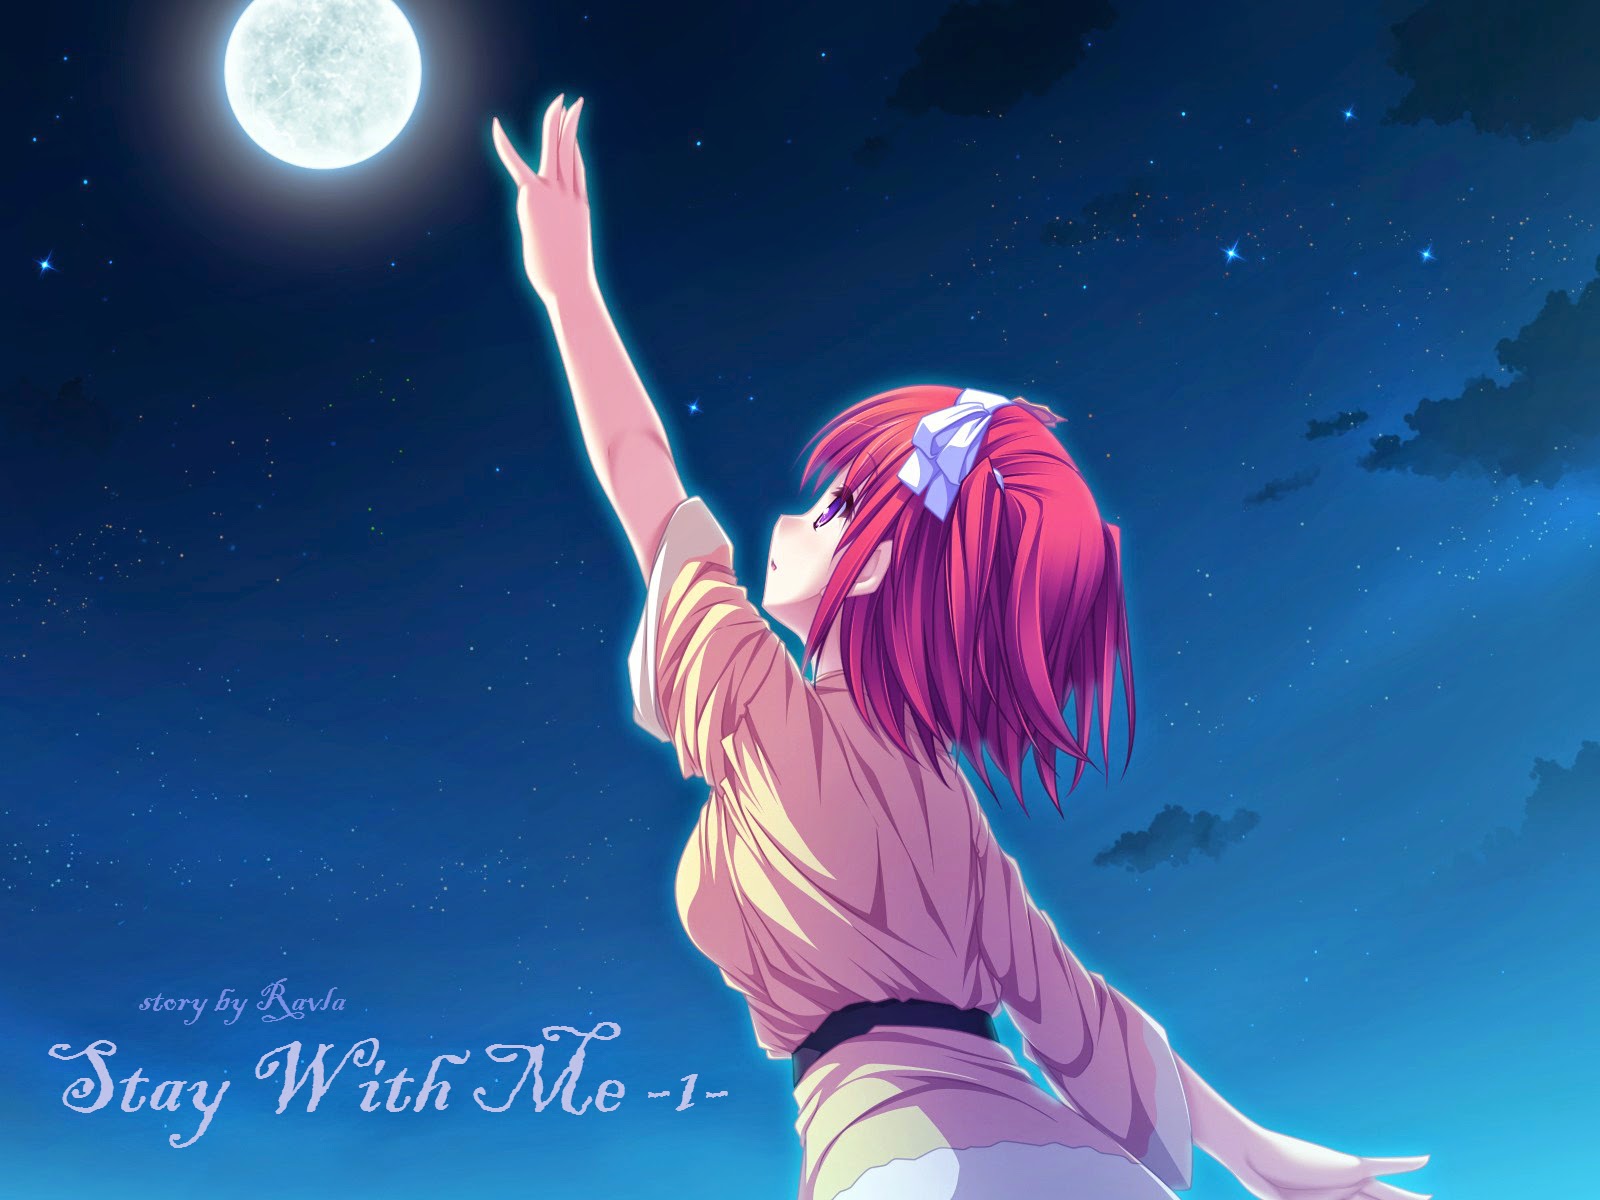 Stay WIth Me -1-